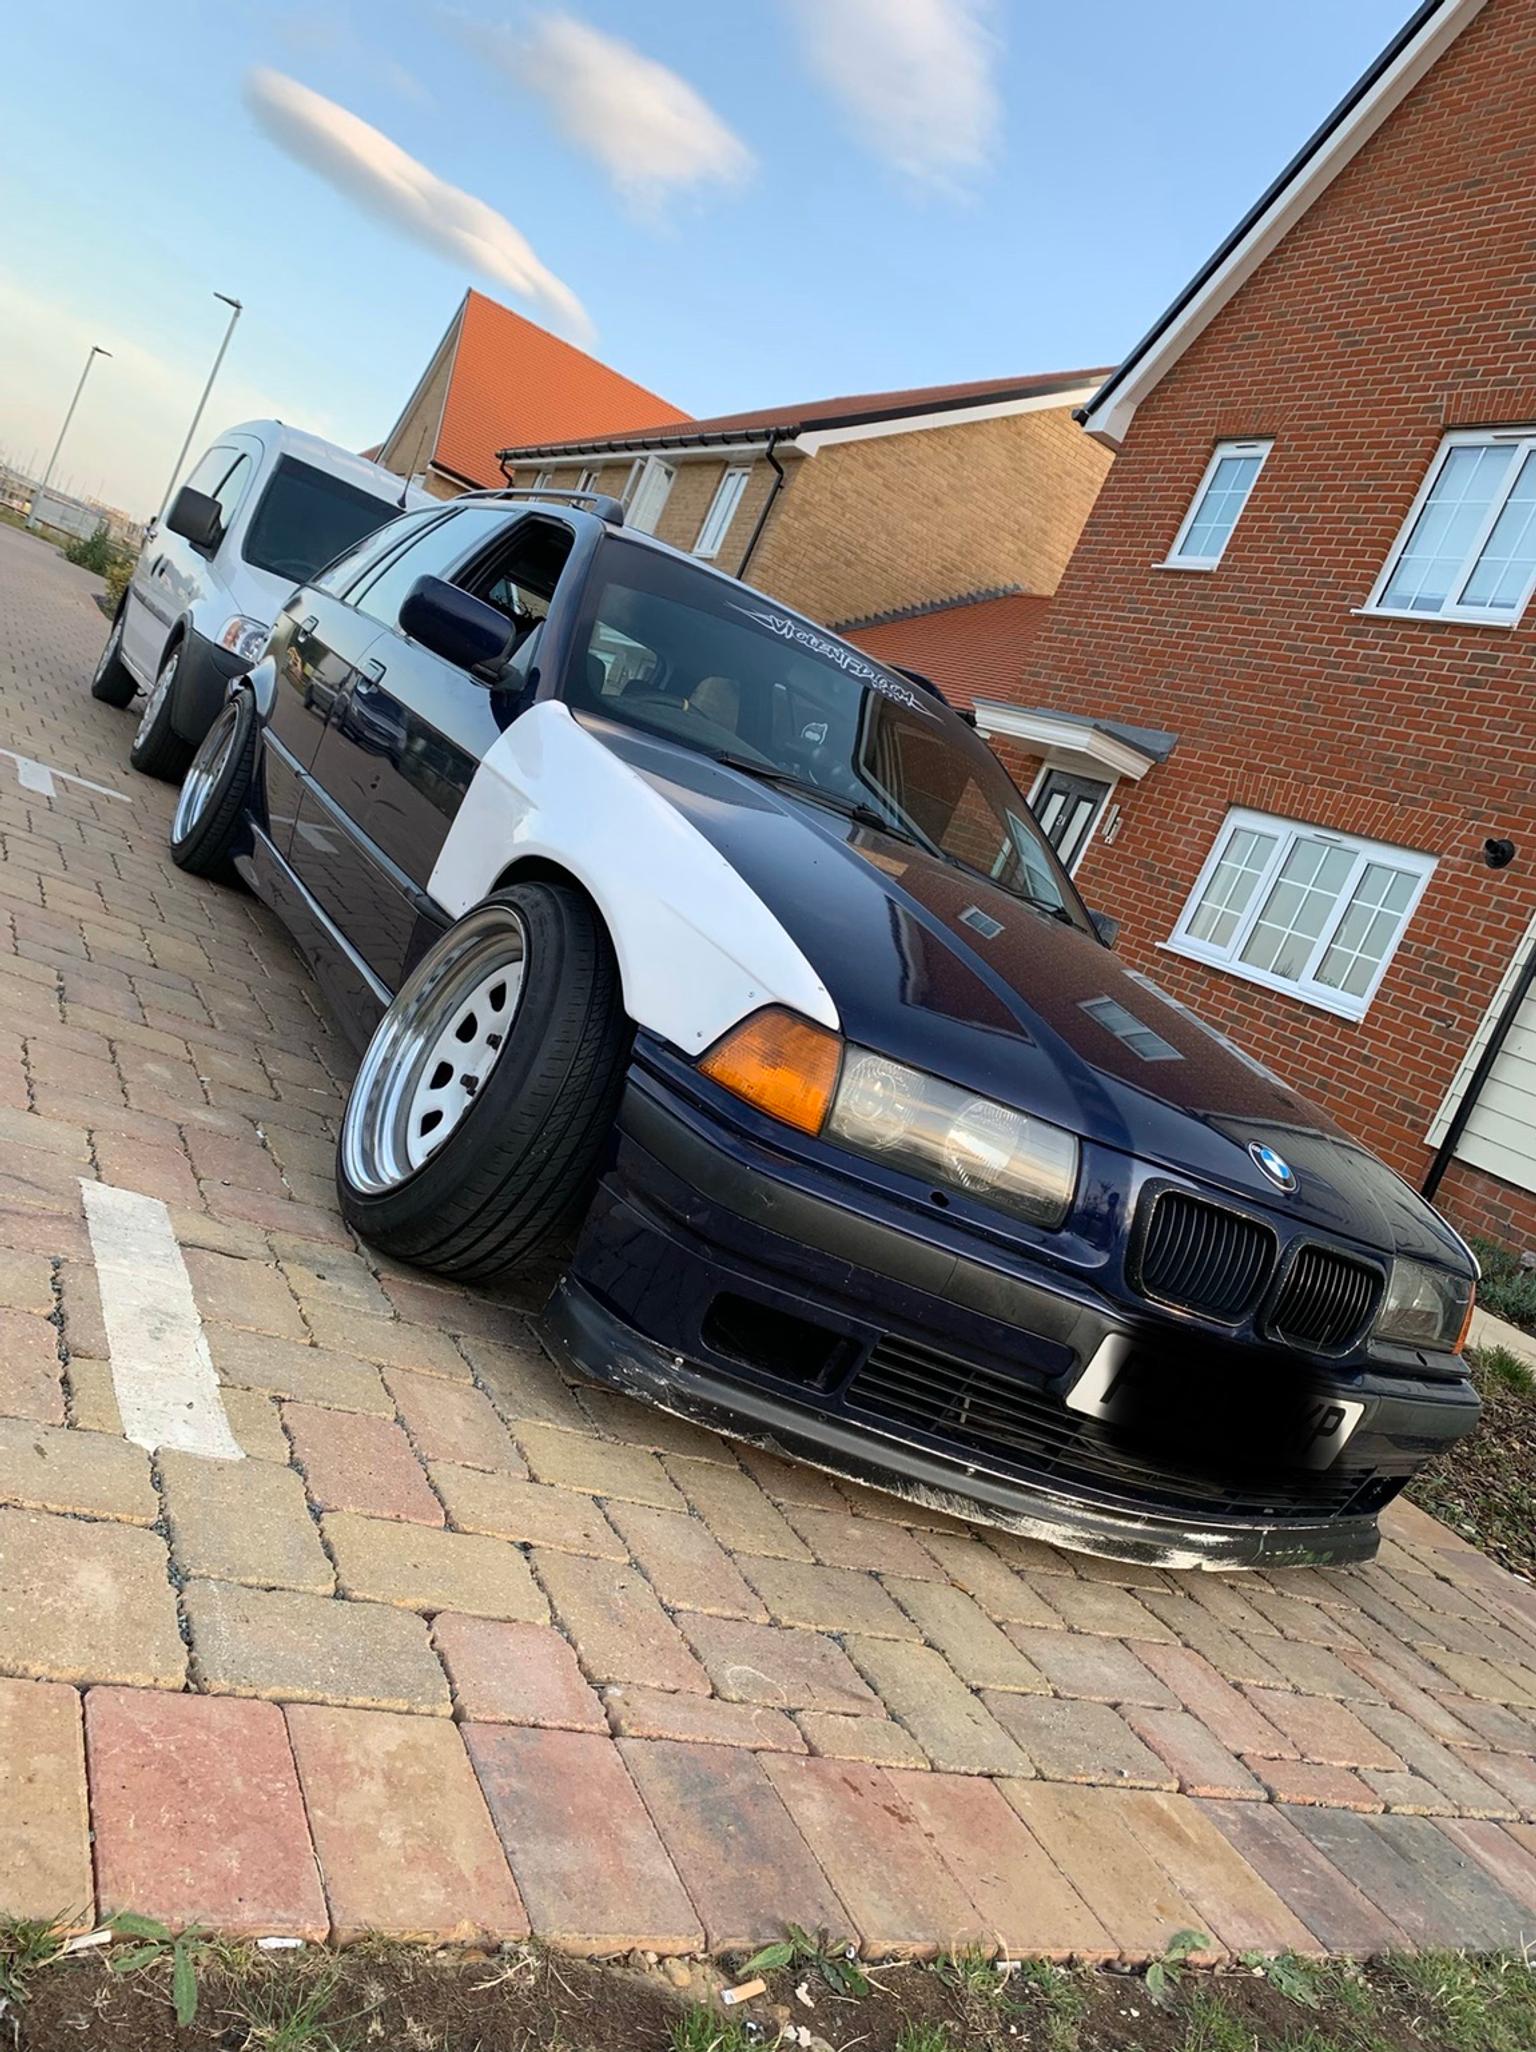 Bmw e36 2.5 TDS drift car in Braintree for £1,800.00 for